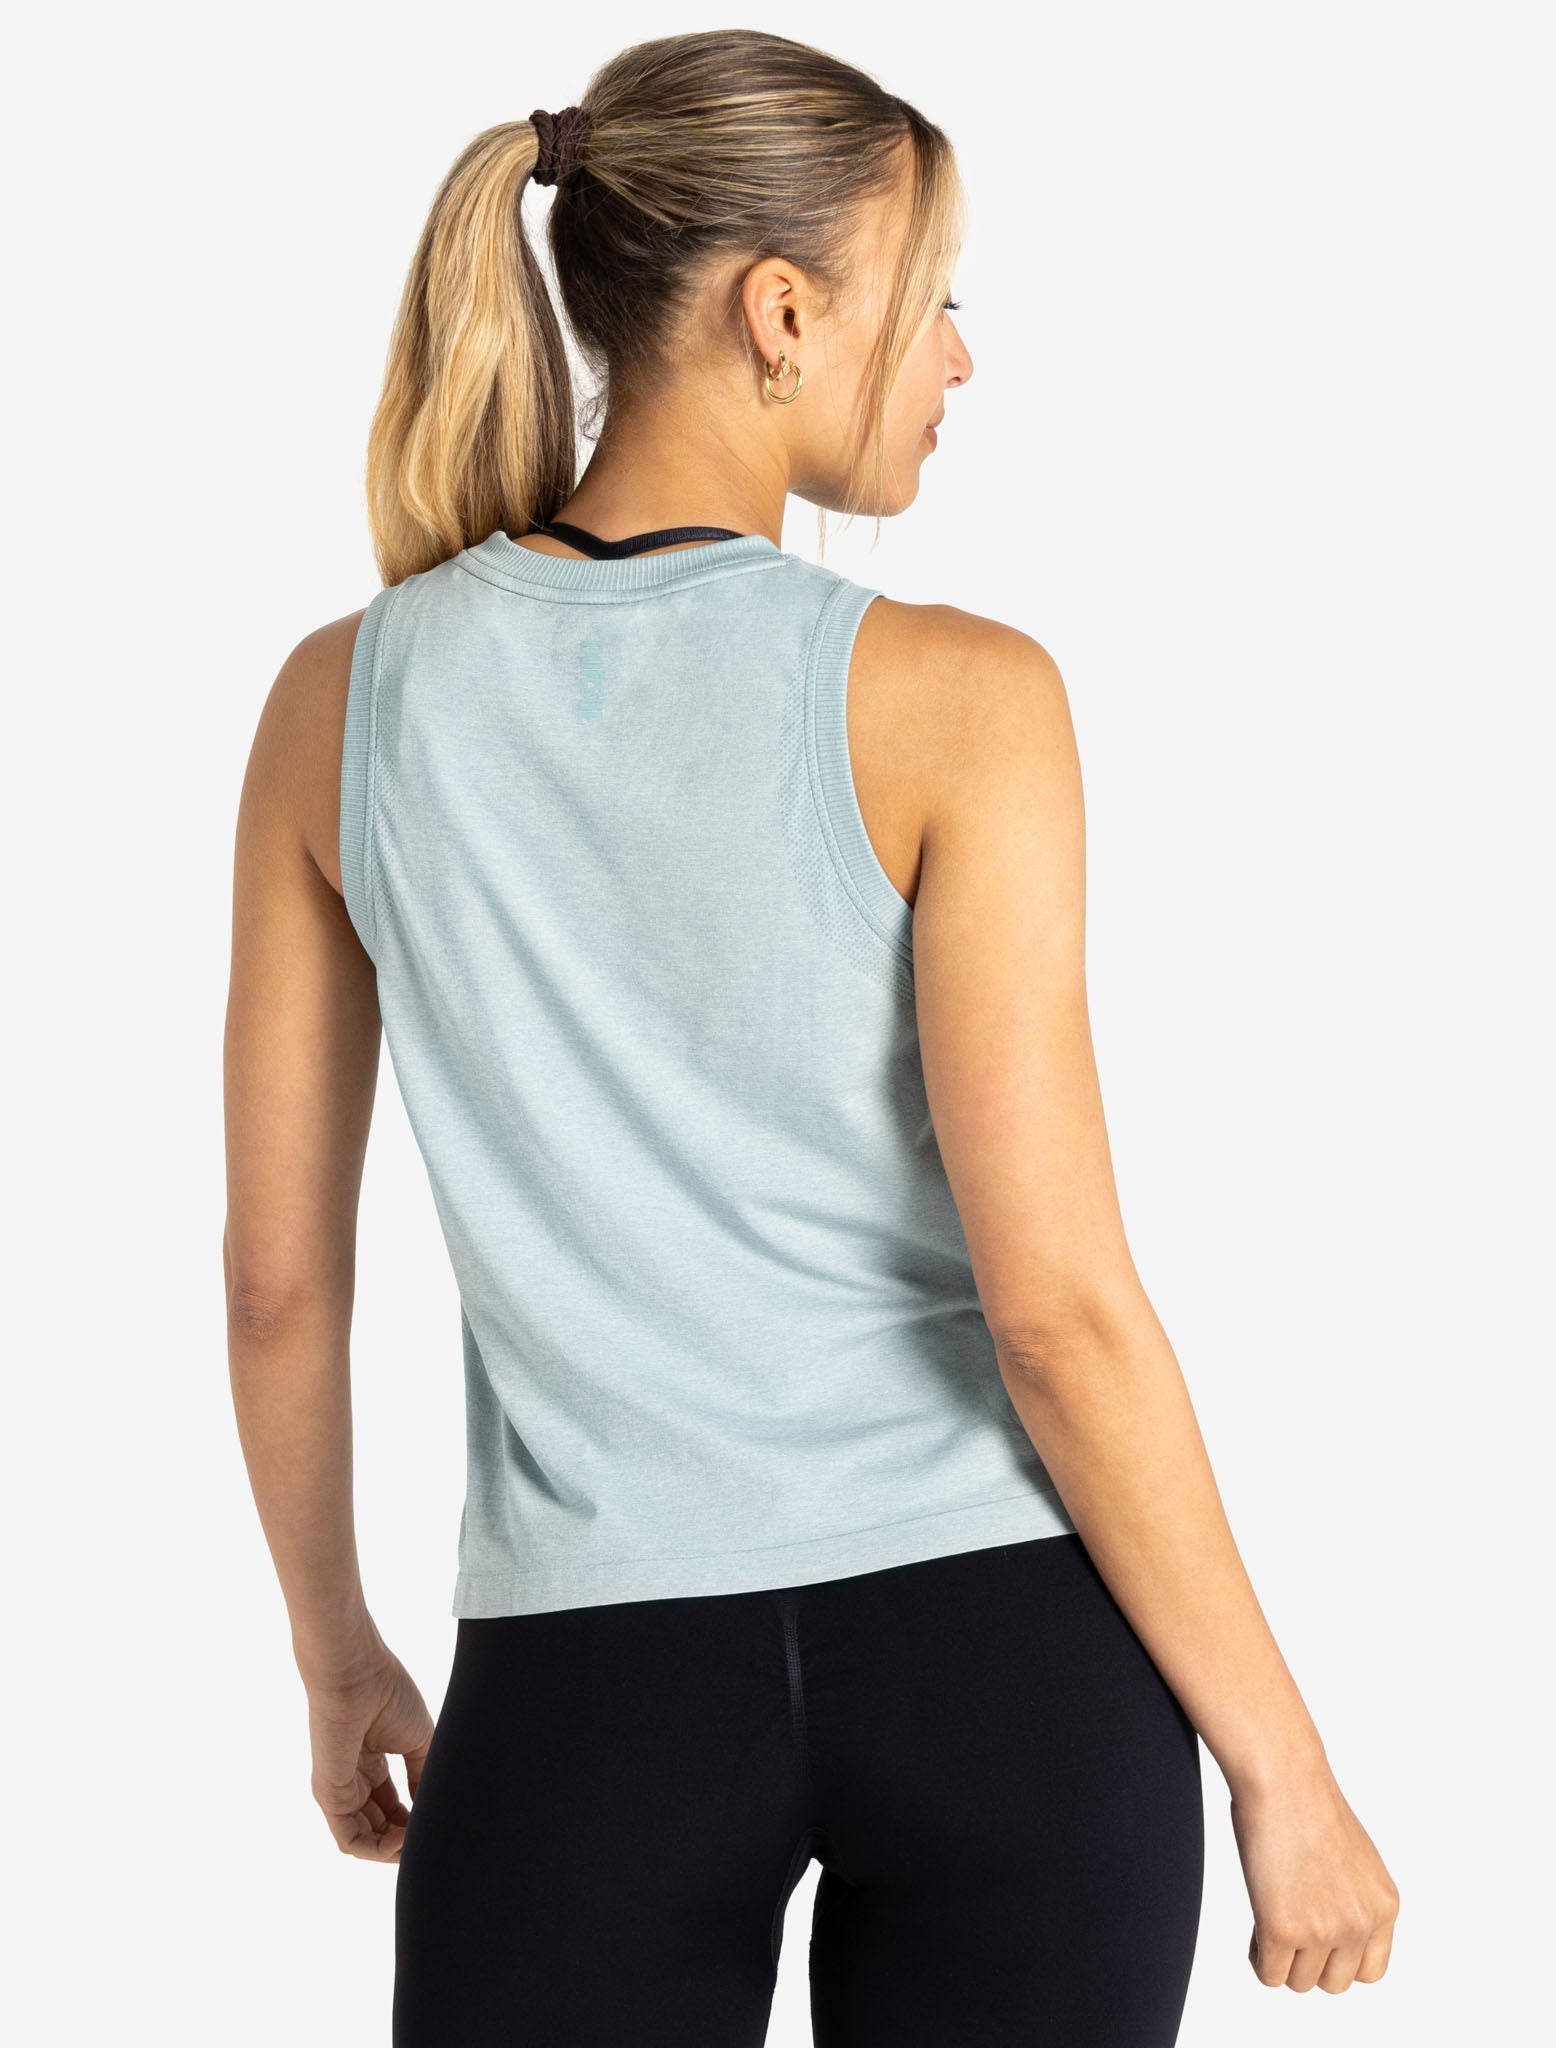 Women's Gym Vests  Workout Tops – LC Activewear